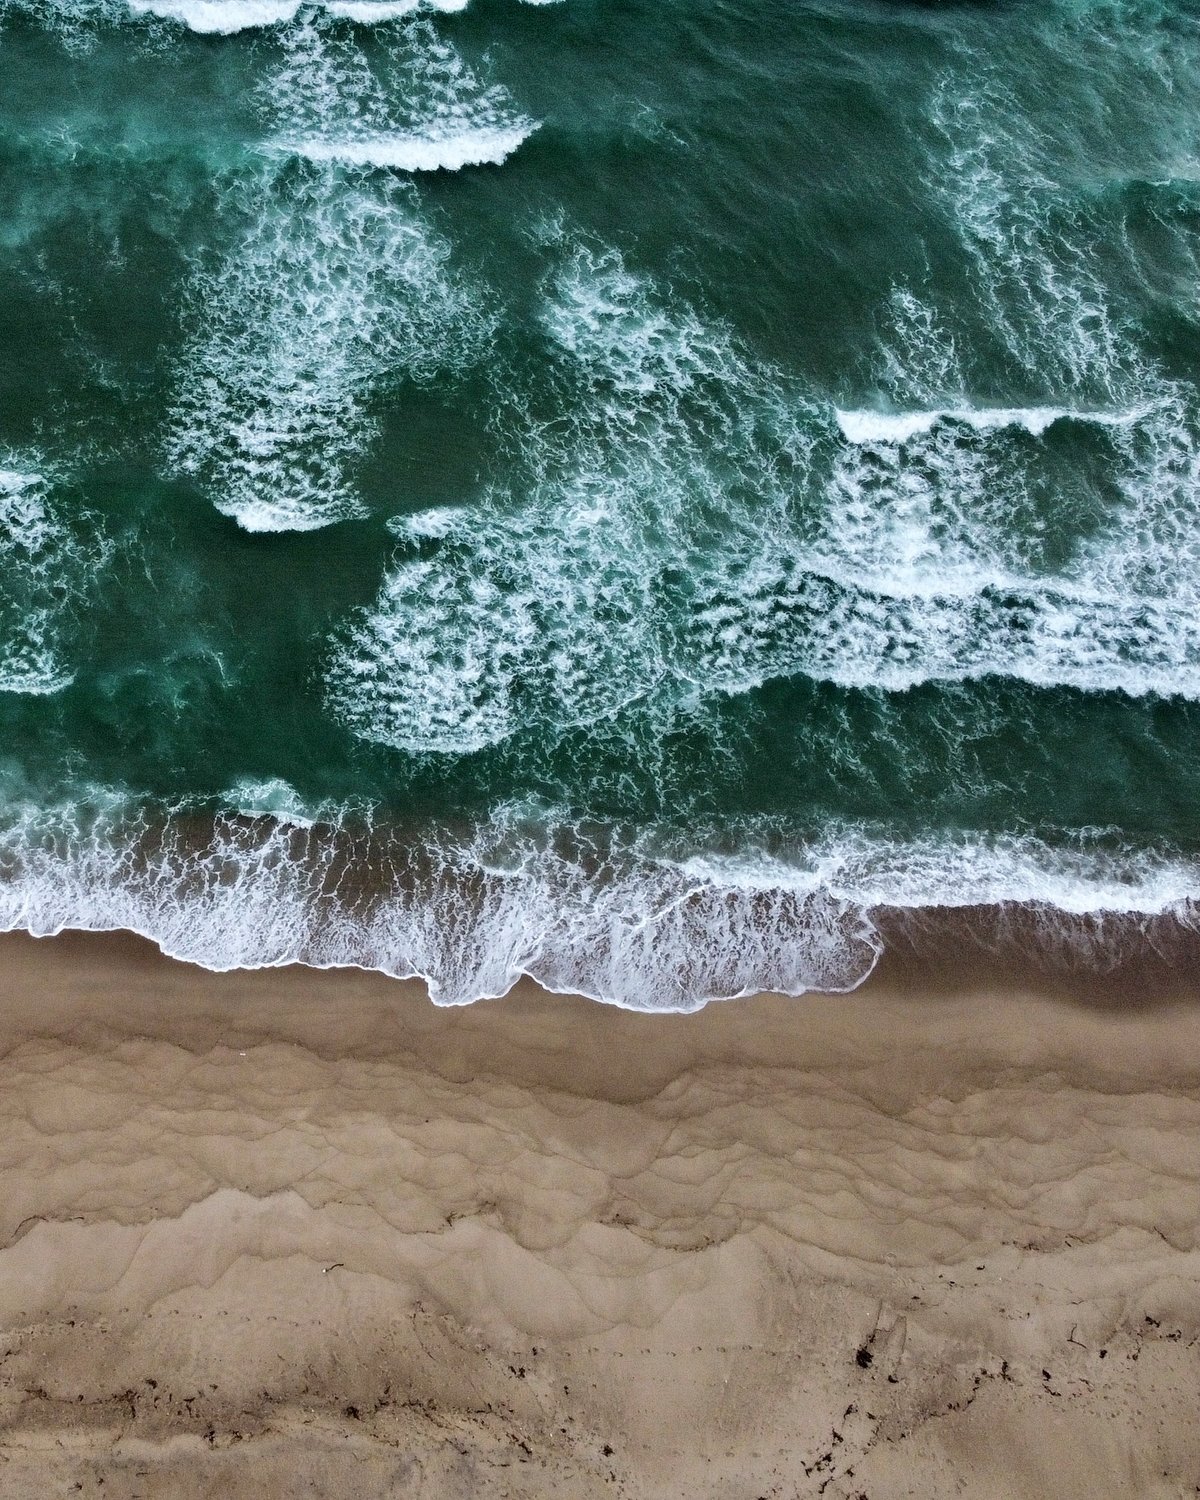 A drone's eye view of the beach.